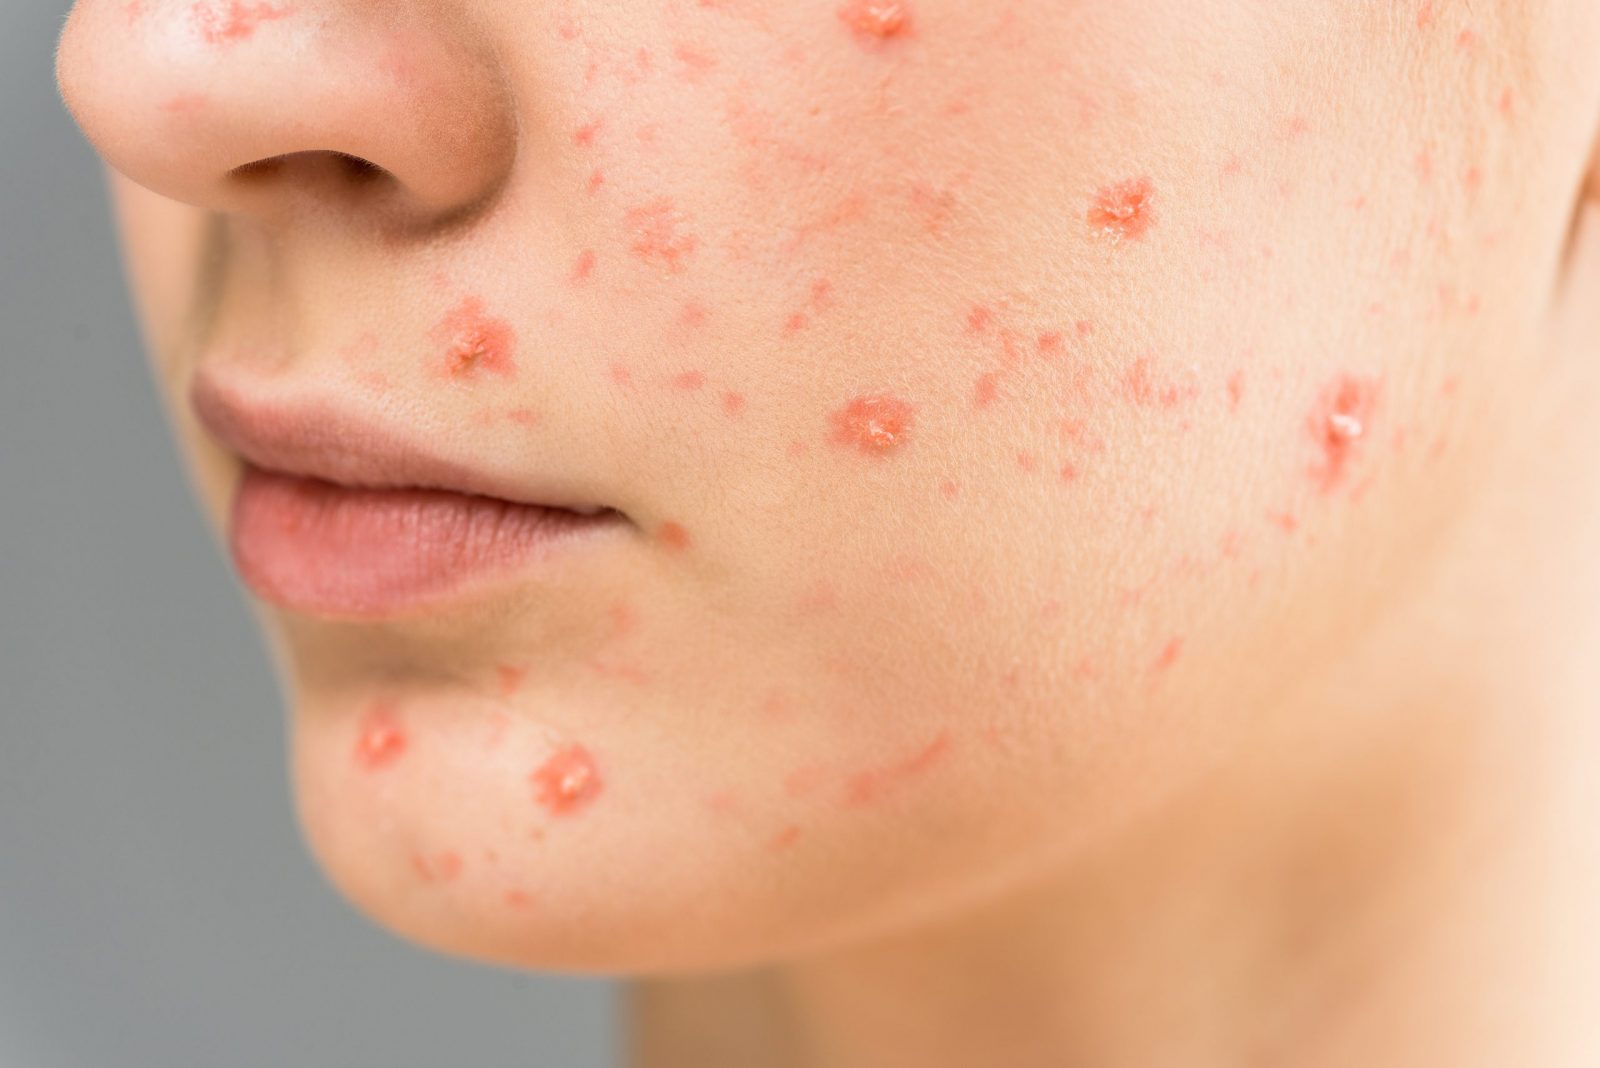 girl's face with acne